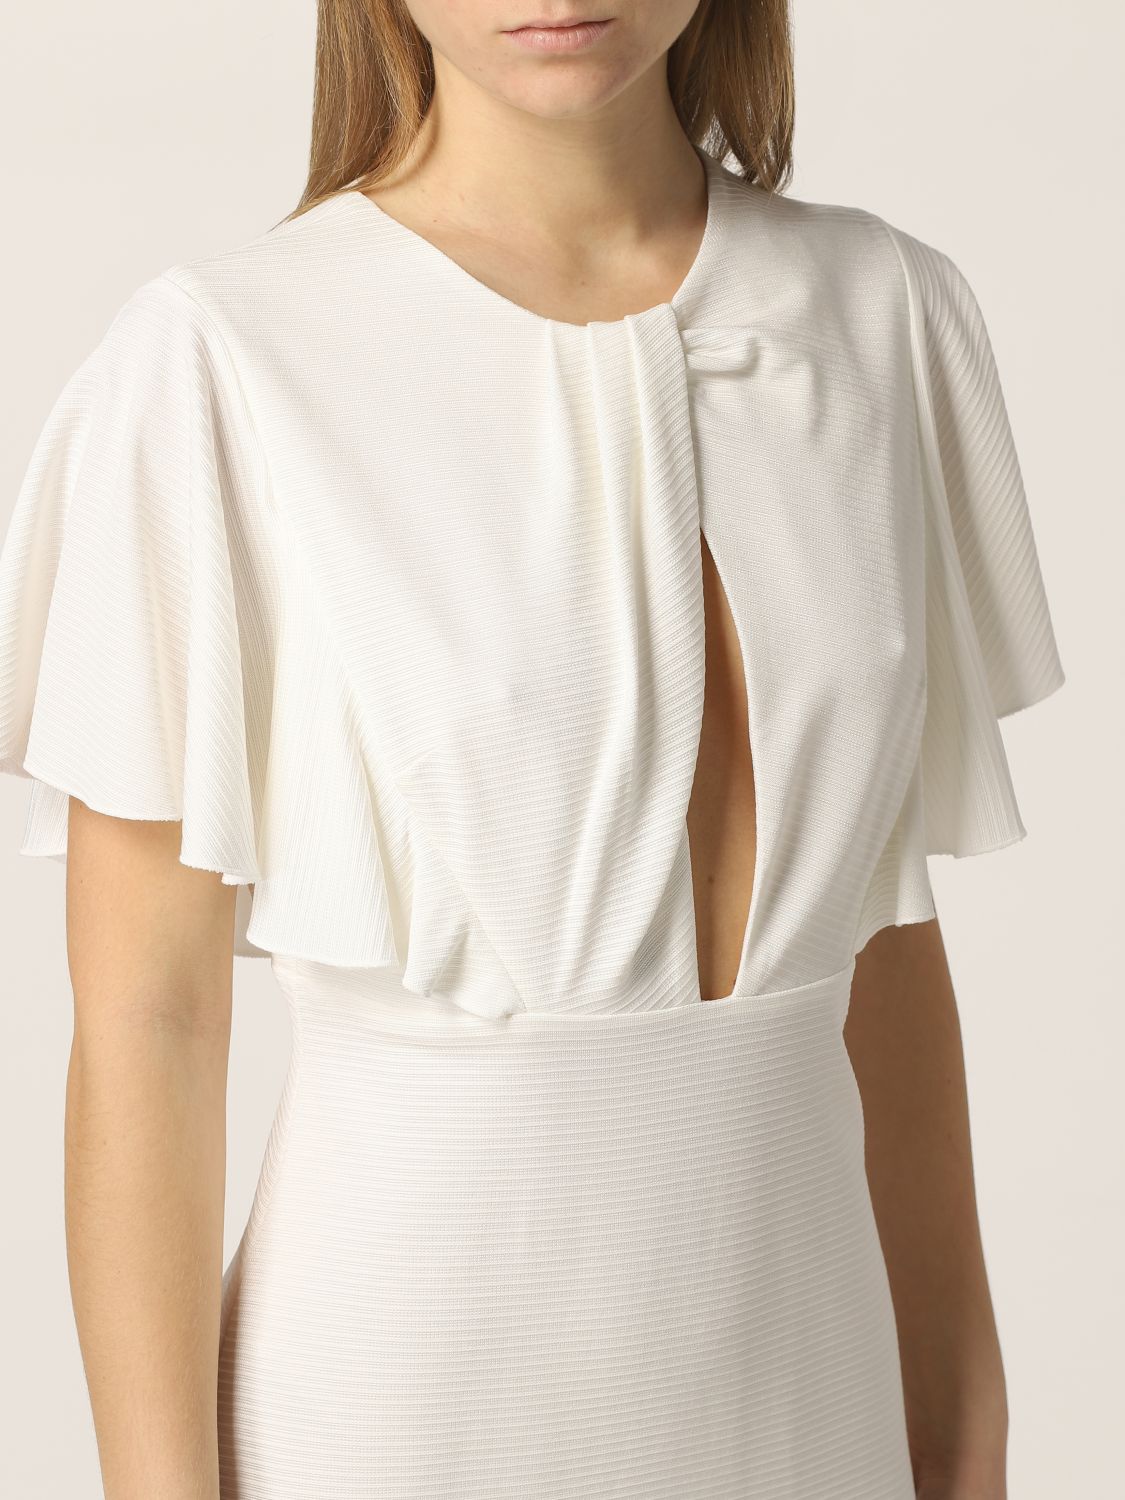 Dress Vanessa Cocchiaro: Vanessa Cocchiaro dress for woman white 3